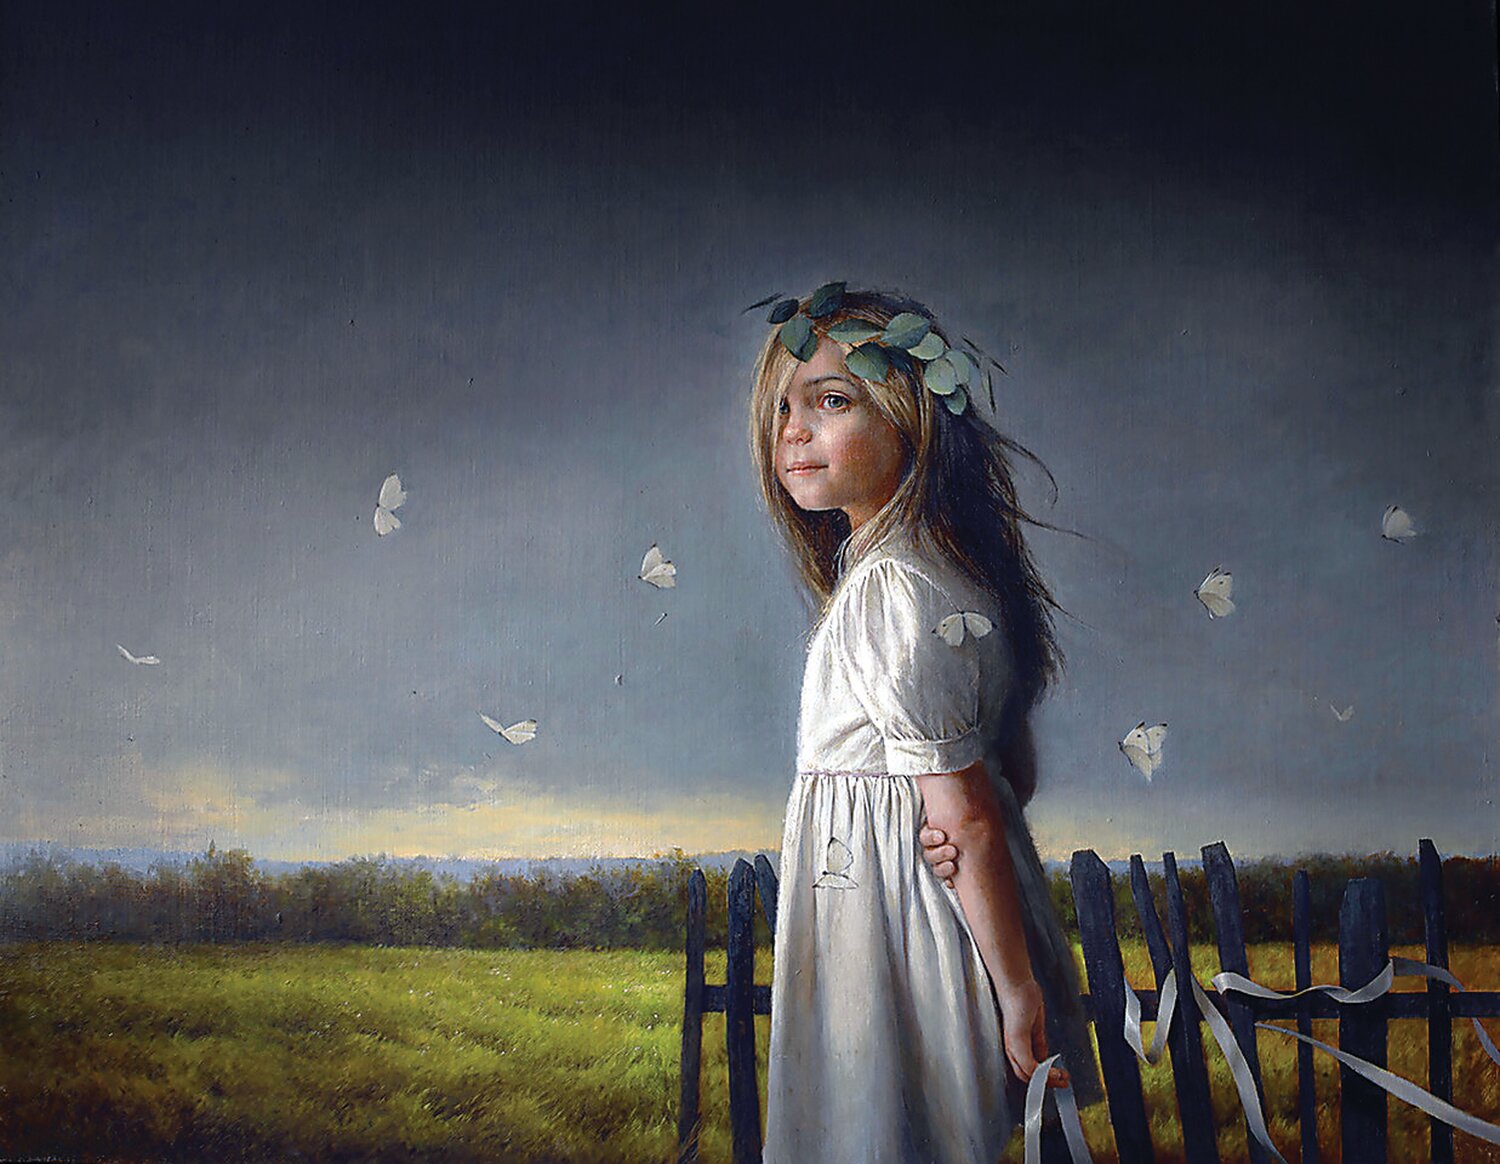 “Mia” is an OPA award-winning oil painting by Robert Papp.